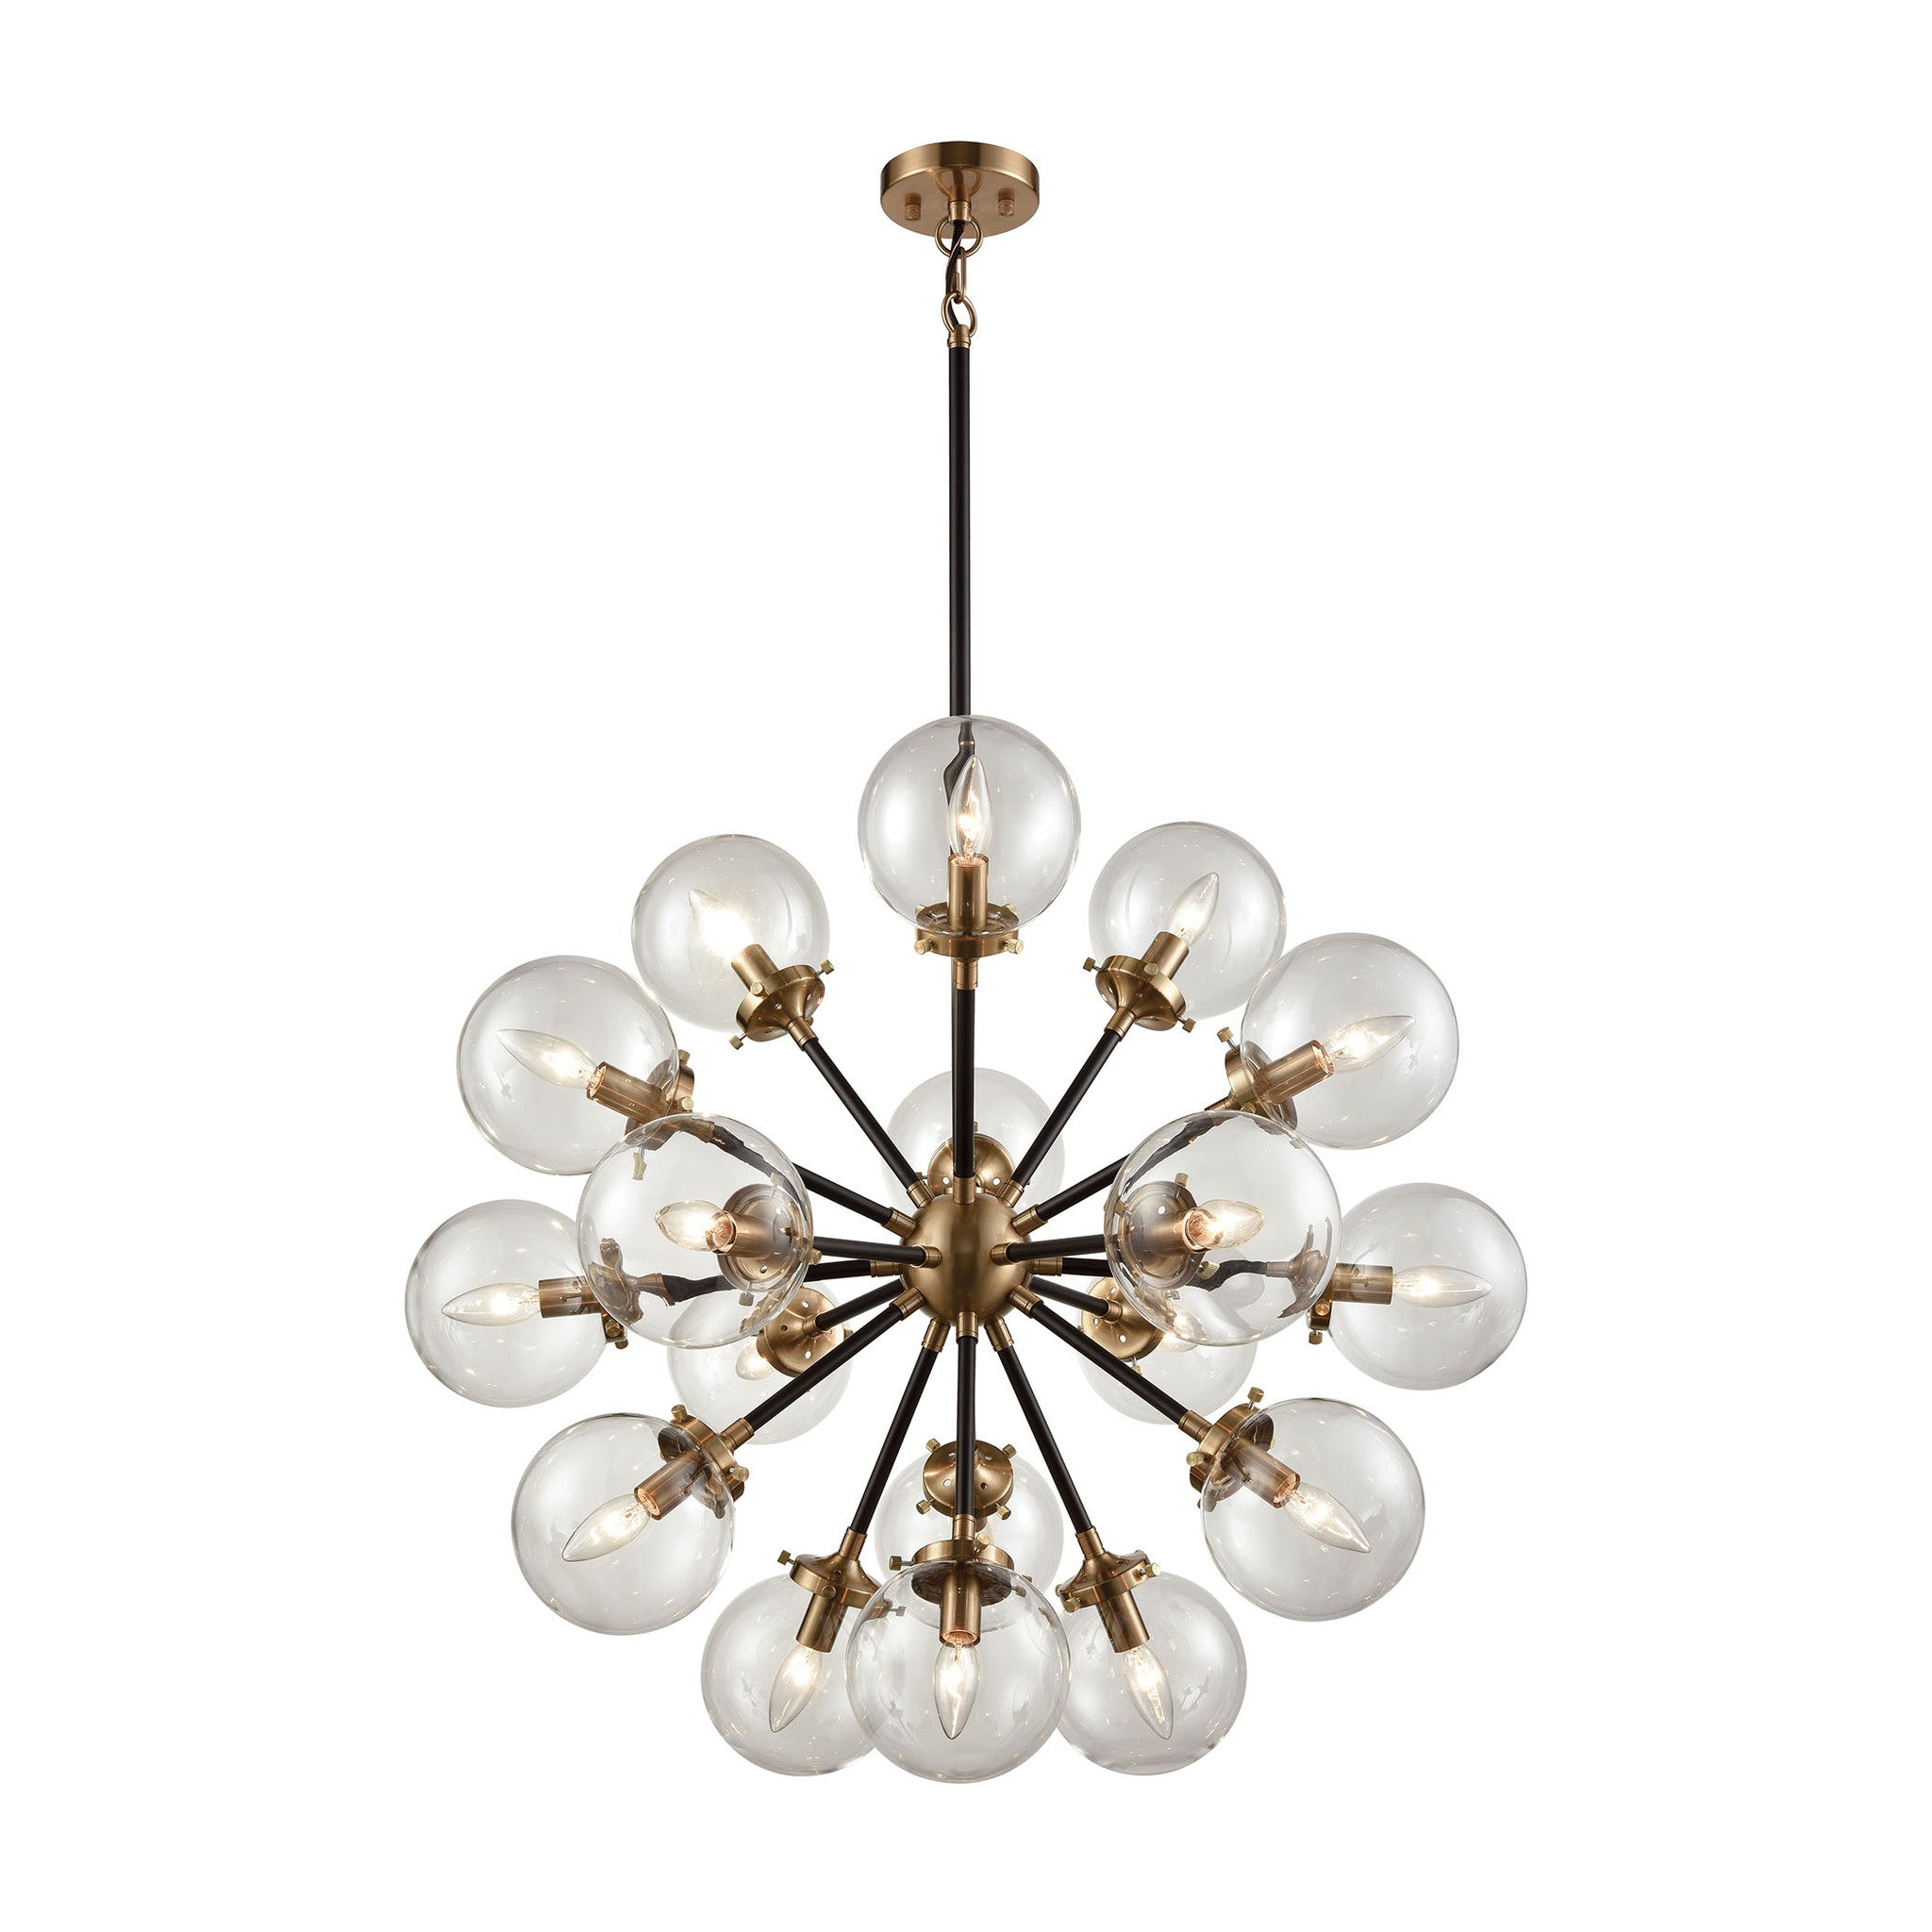 Mid-Century Modern 18 Light Nyx Chandelier in Matte Black and Antique Gold with Clear Glass Globe Shades 